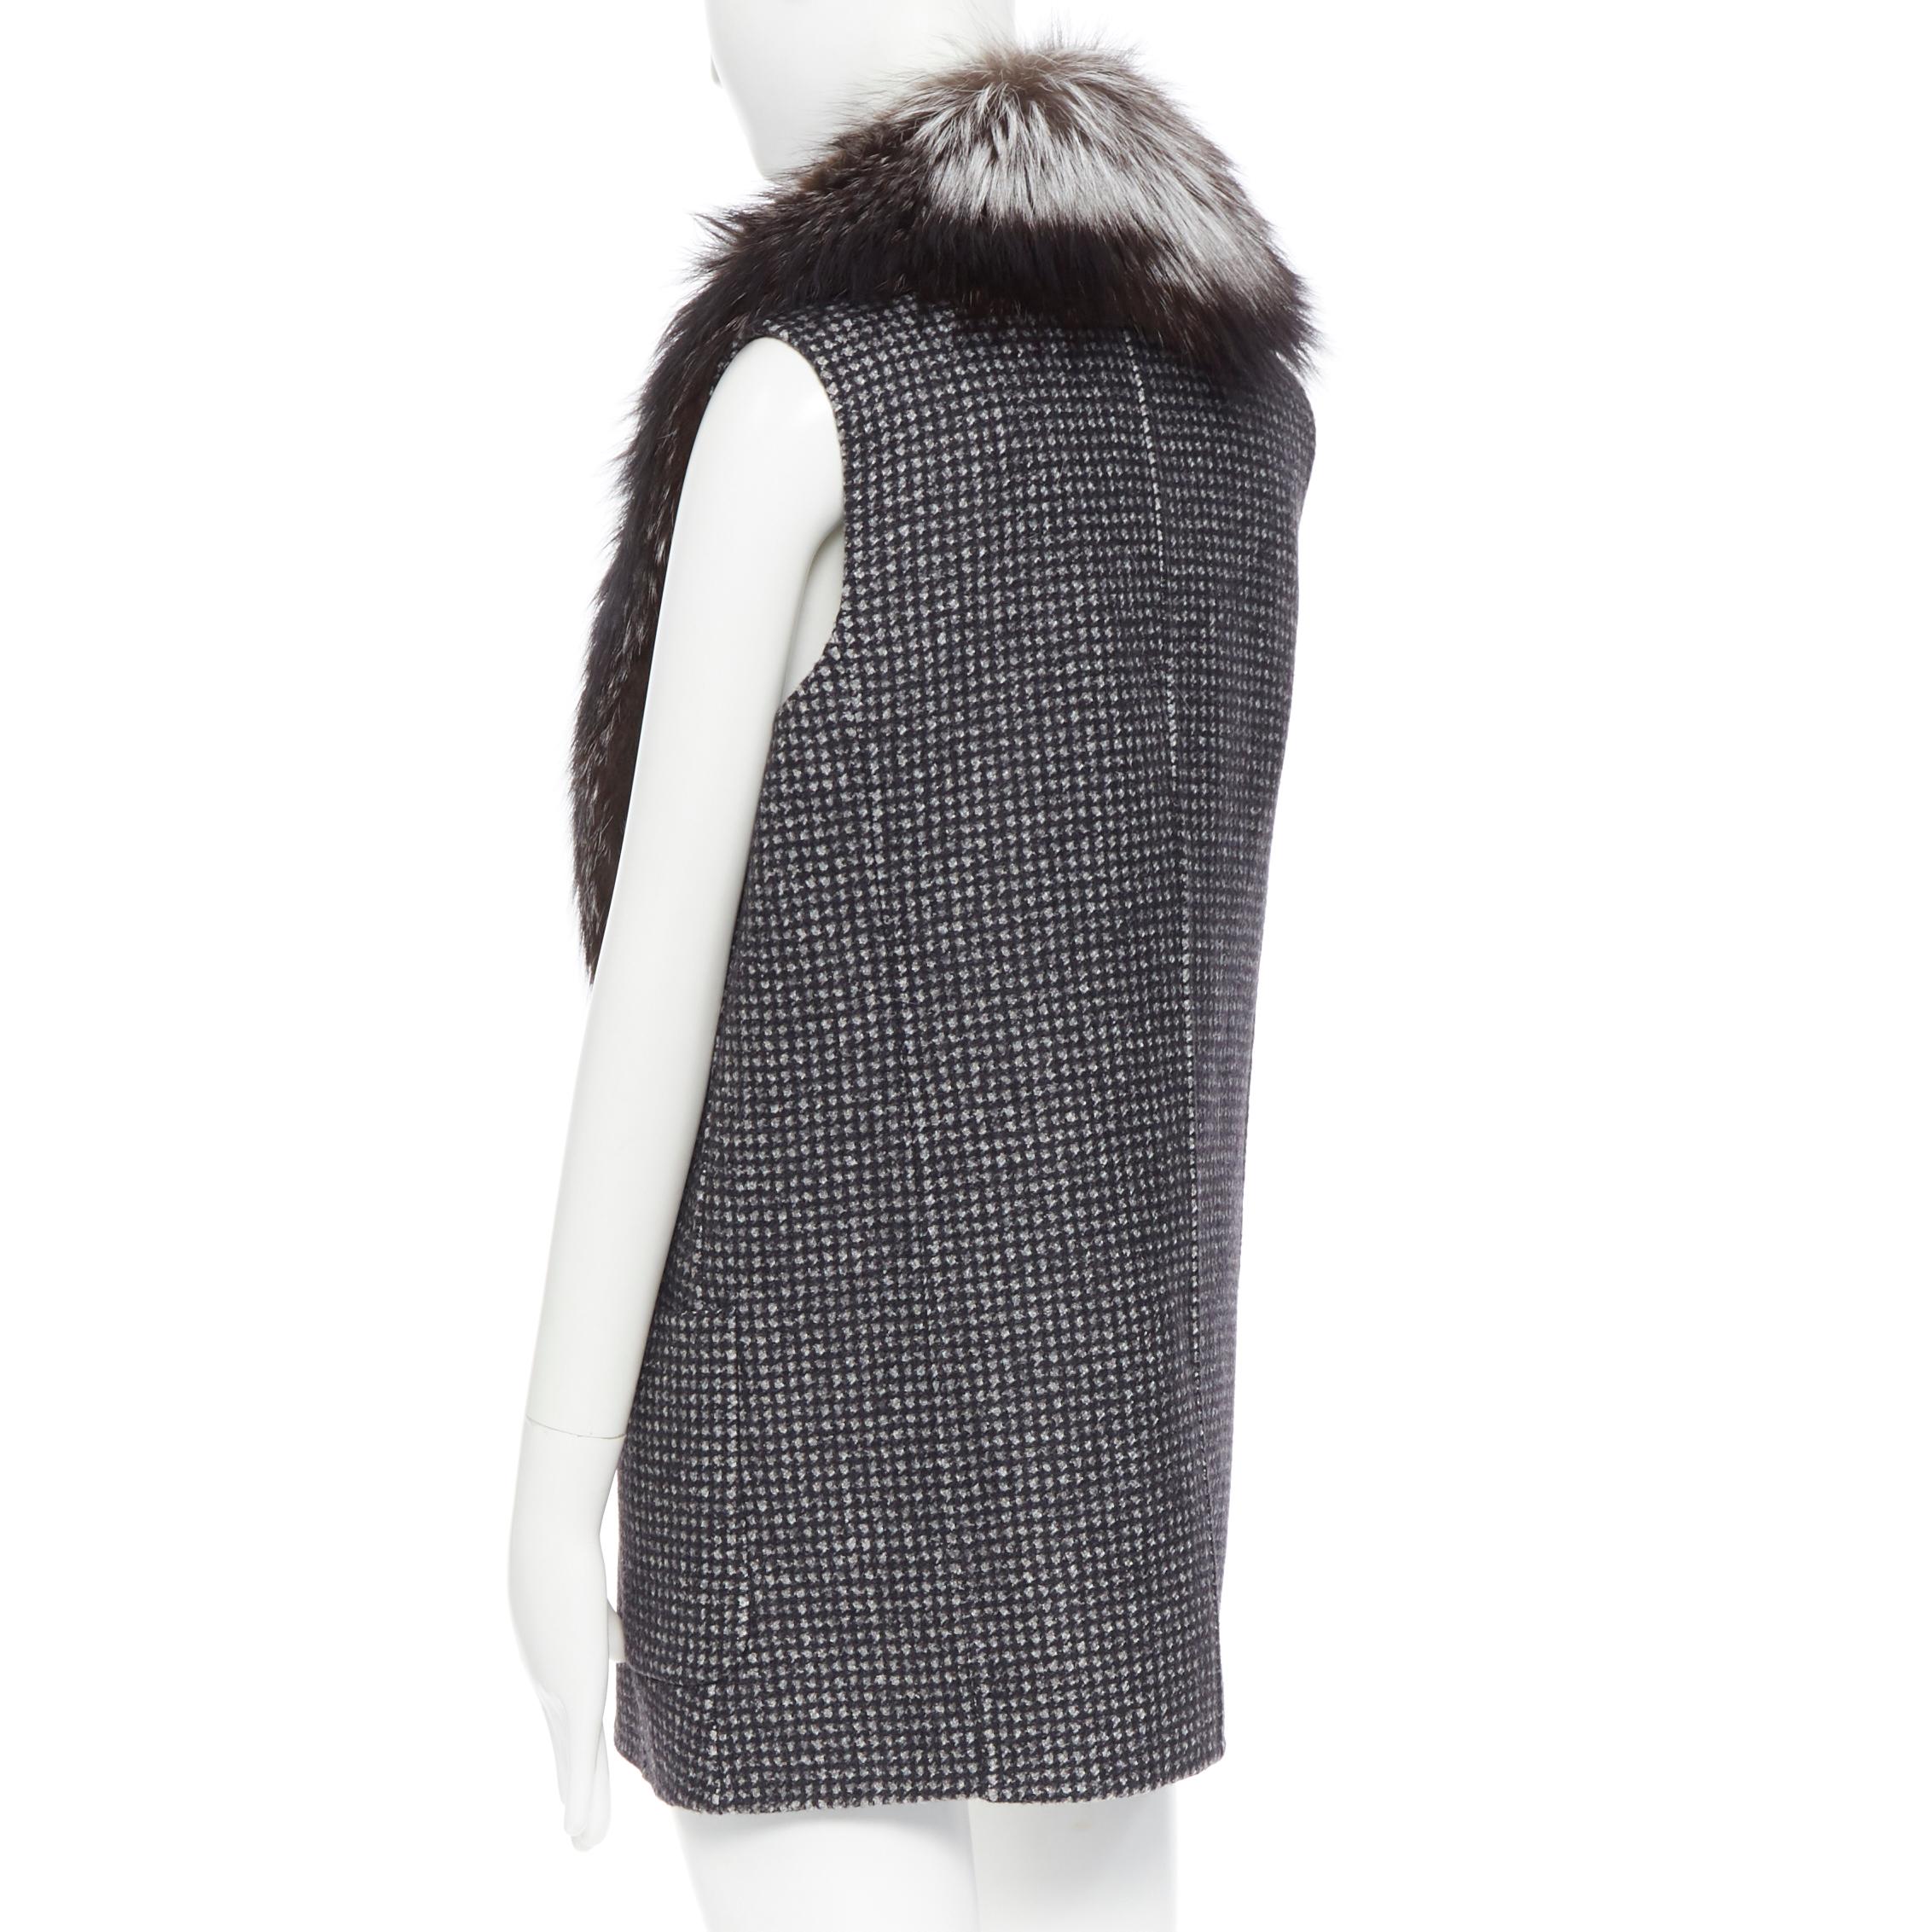 Women's new MICHAEL KORS COLLECTION AW17 fox fur collar grey checked  wool vest US2 XS